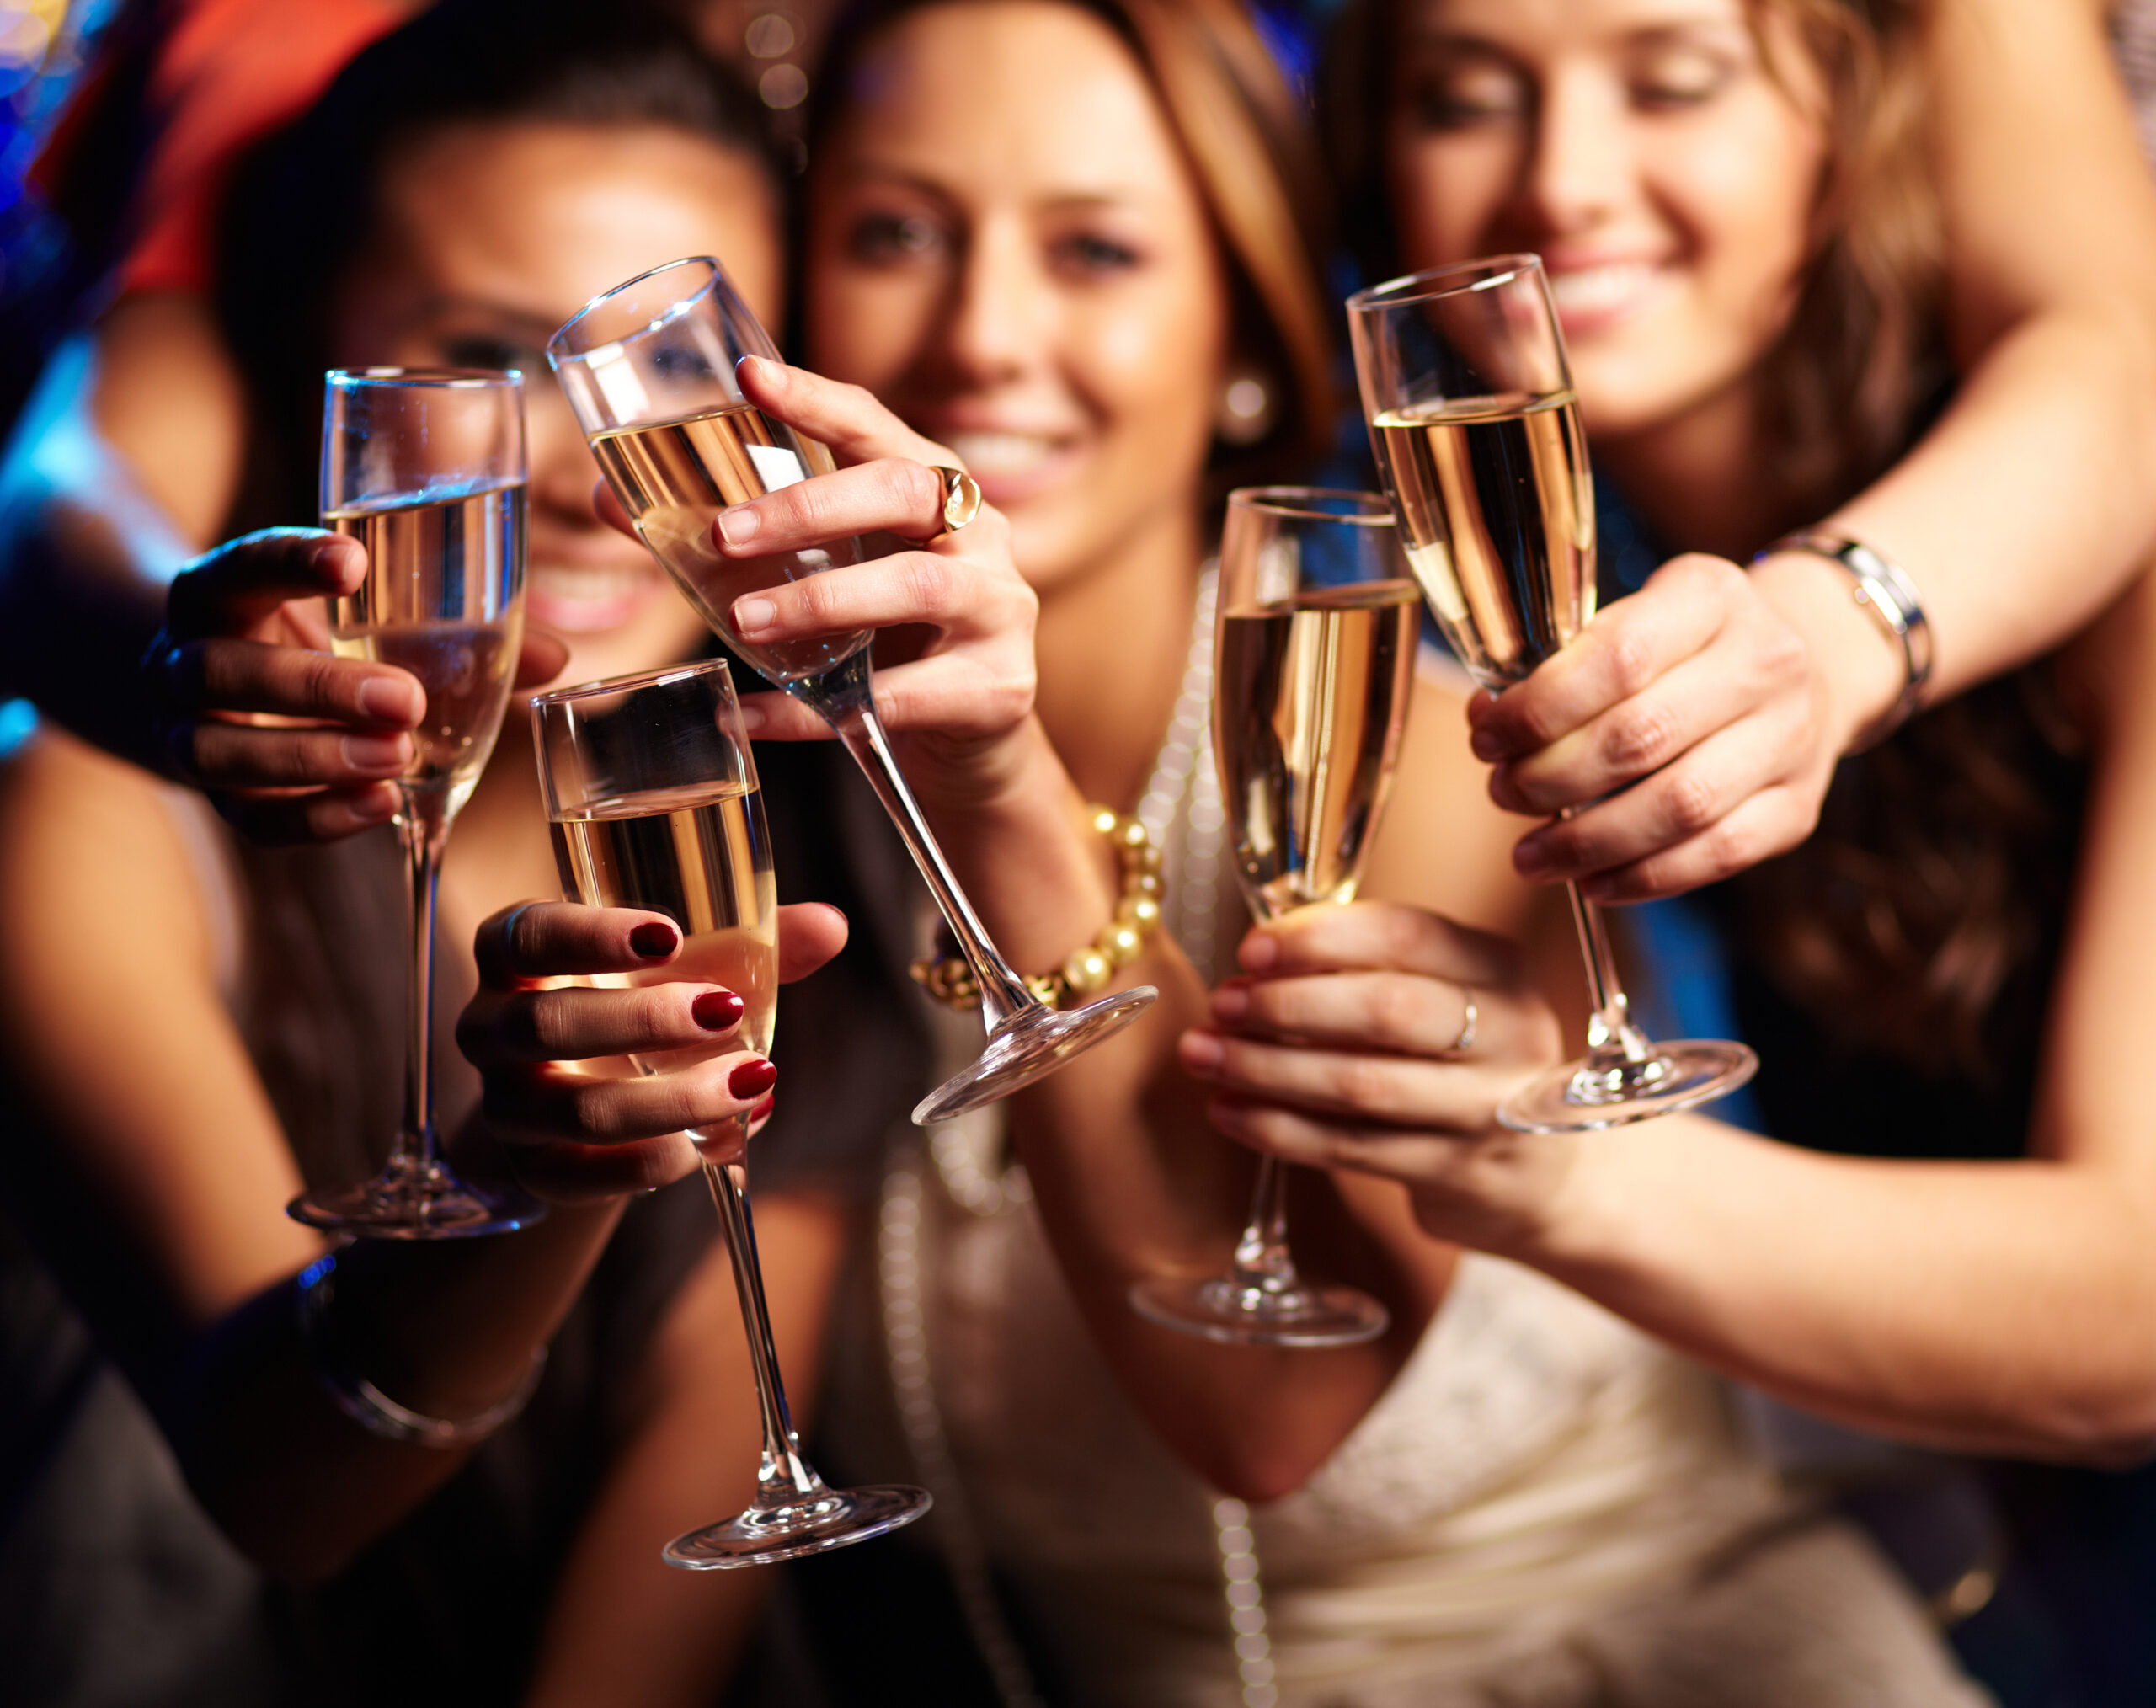 Group,Of,Partying,Girls,Clinking,Flutes,With,Sparkling,Wine